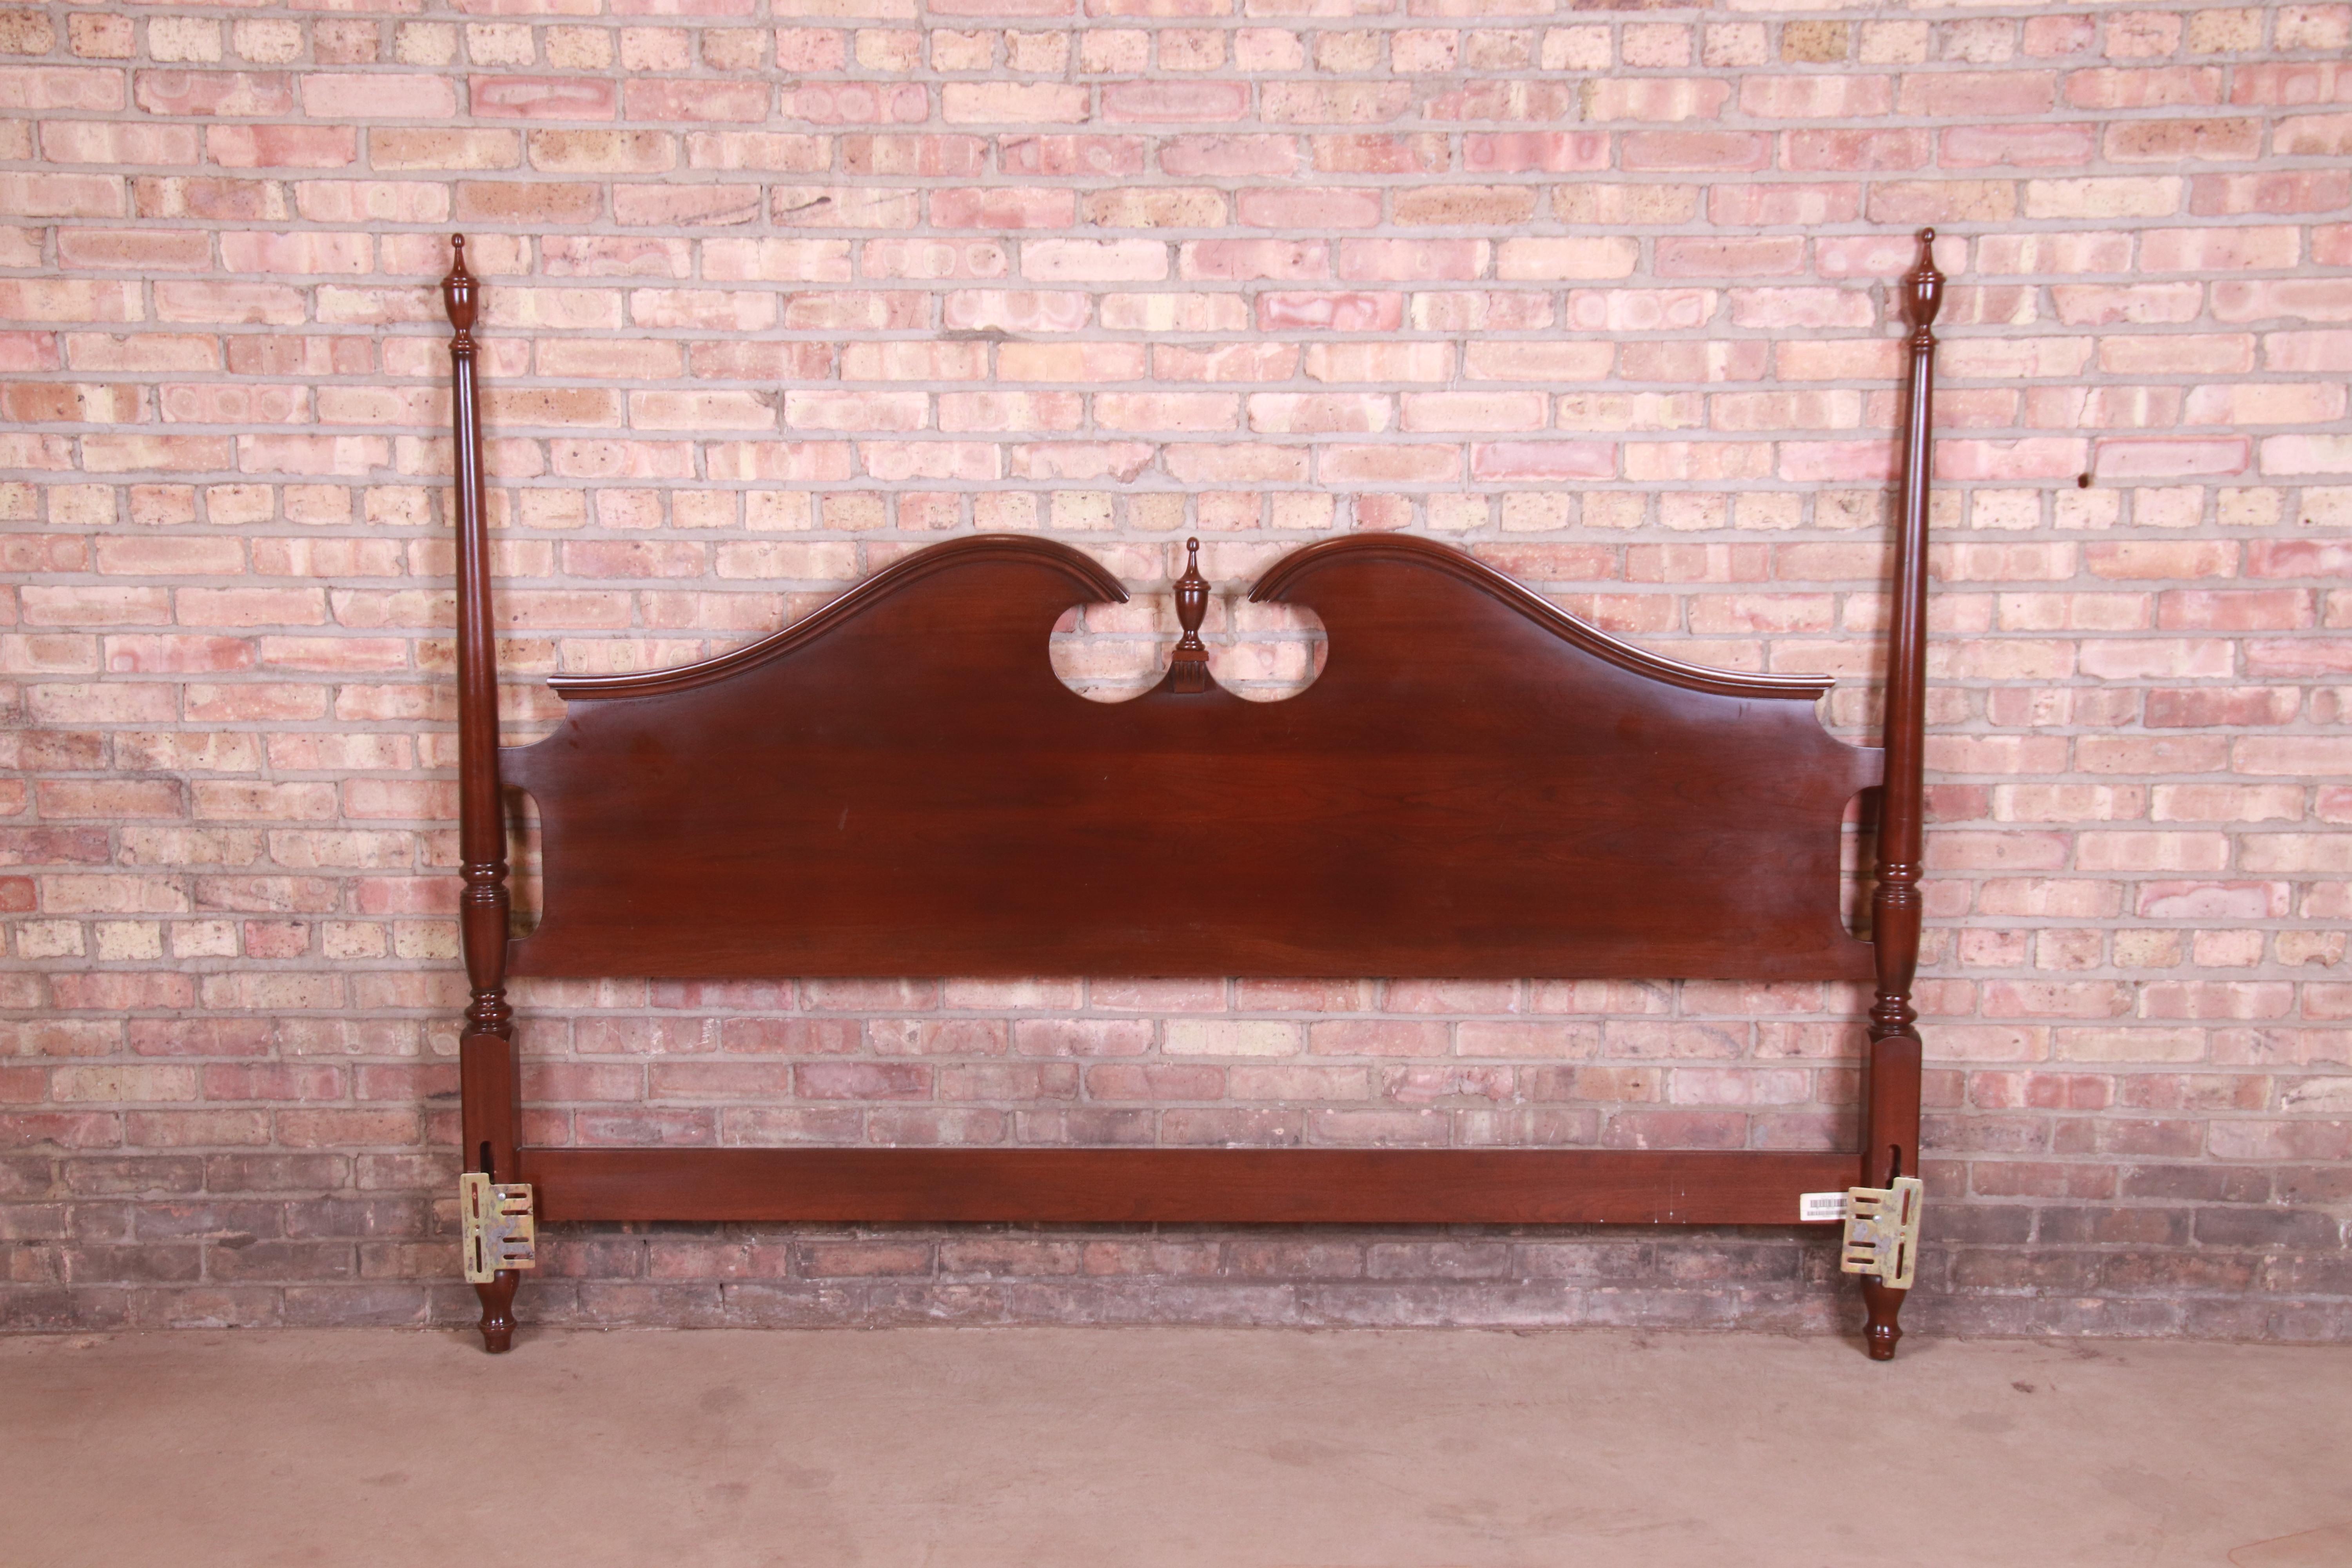 A beautiful Georgian or Chippendale style carved cherry wood king size headboard

By Ethan Allen, 